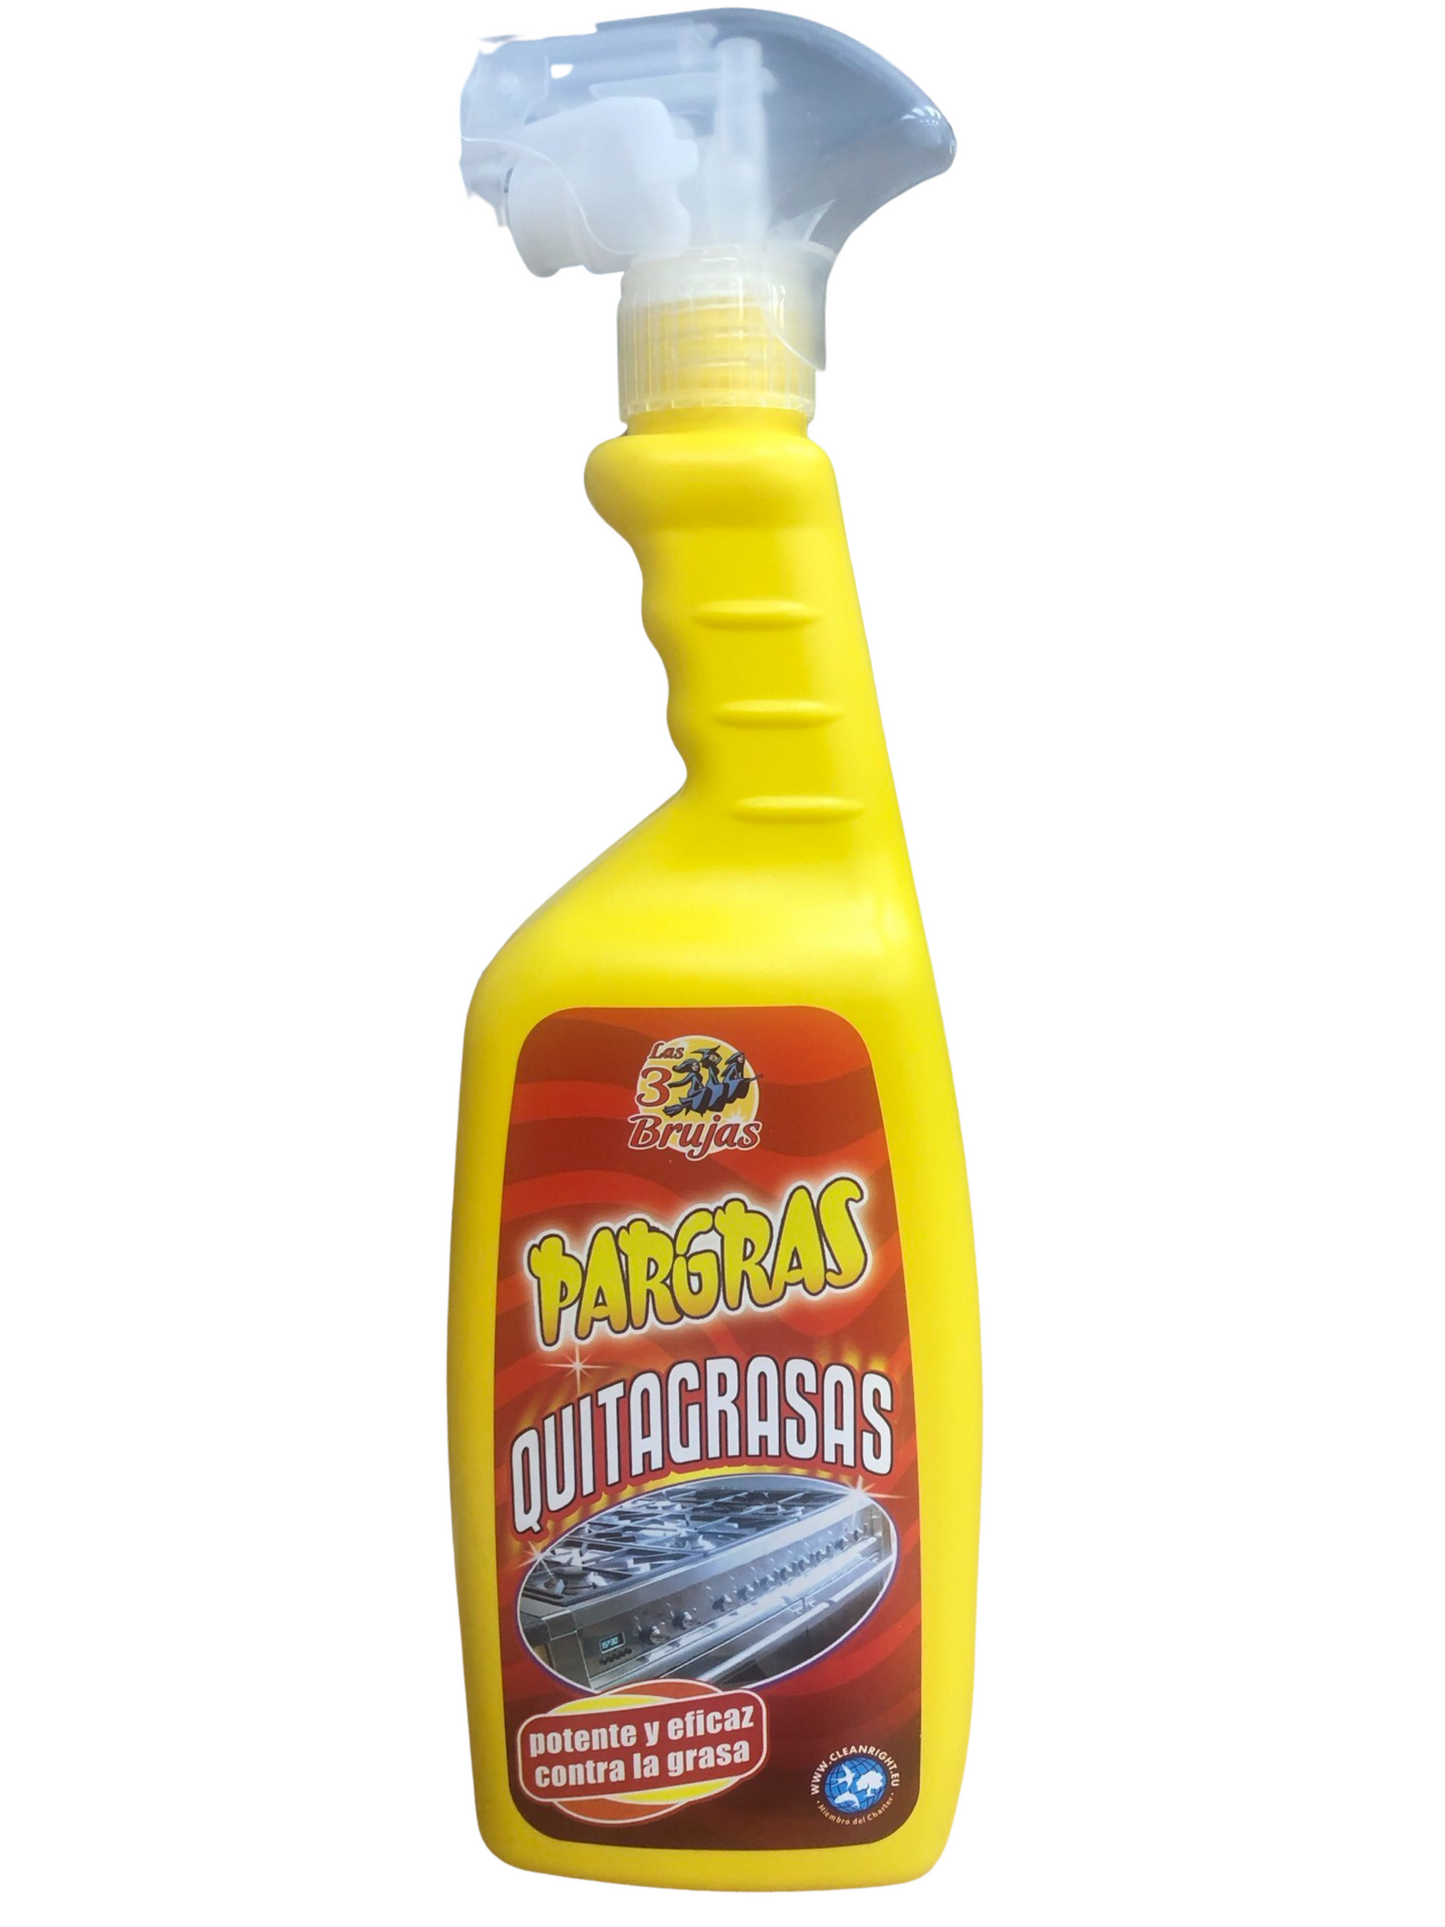 3 Brujas / 3 Witches PARGRAS Degreaser Trigger Spray 750ml